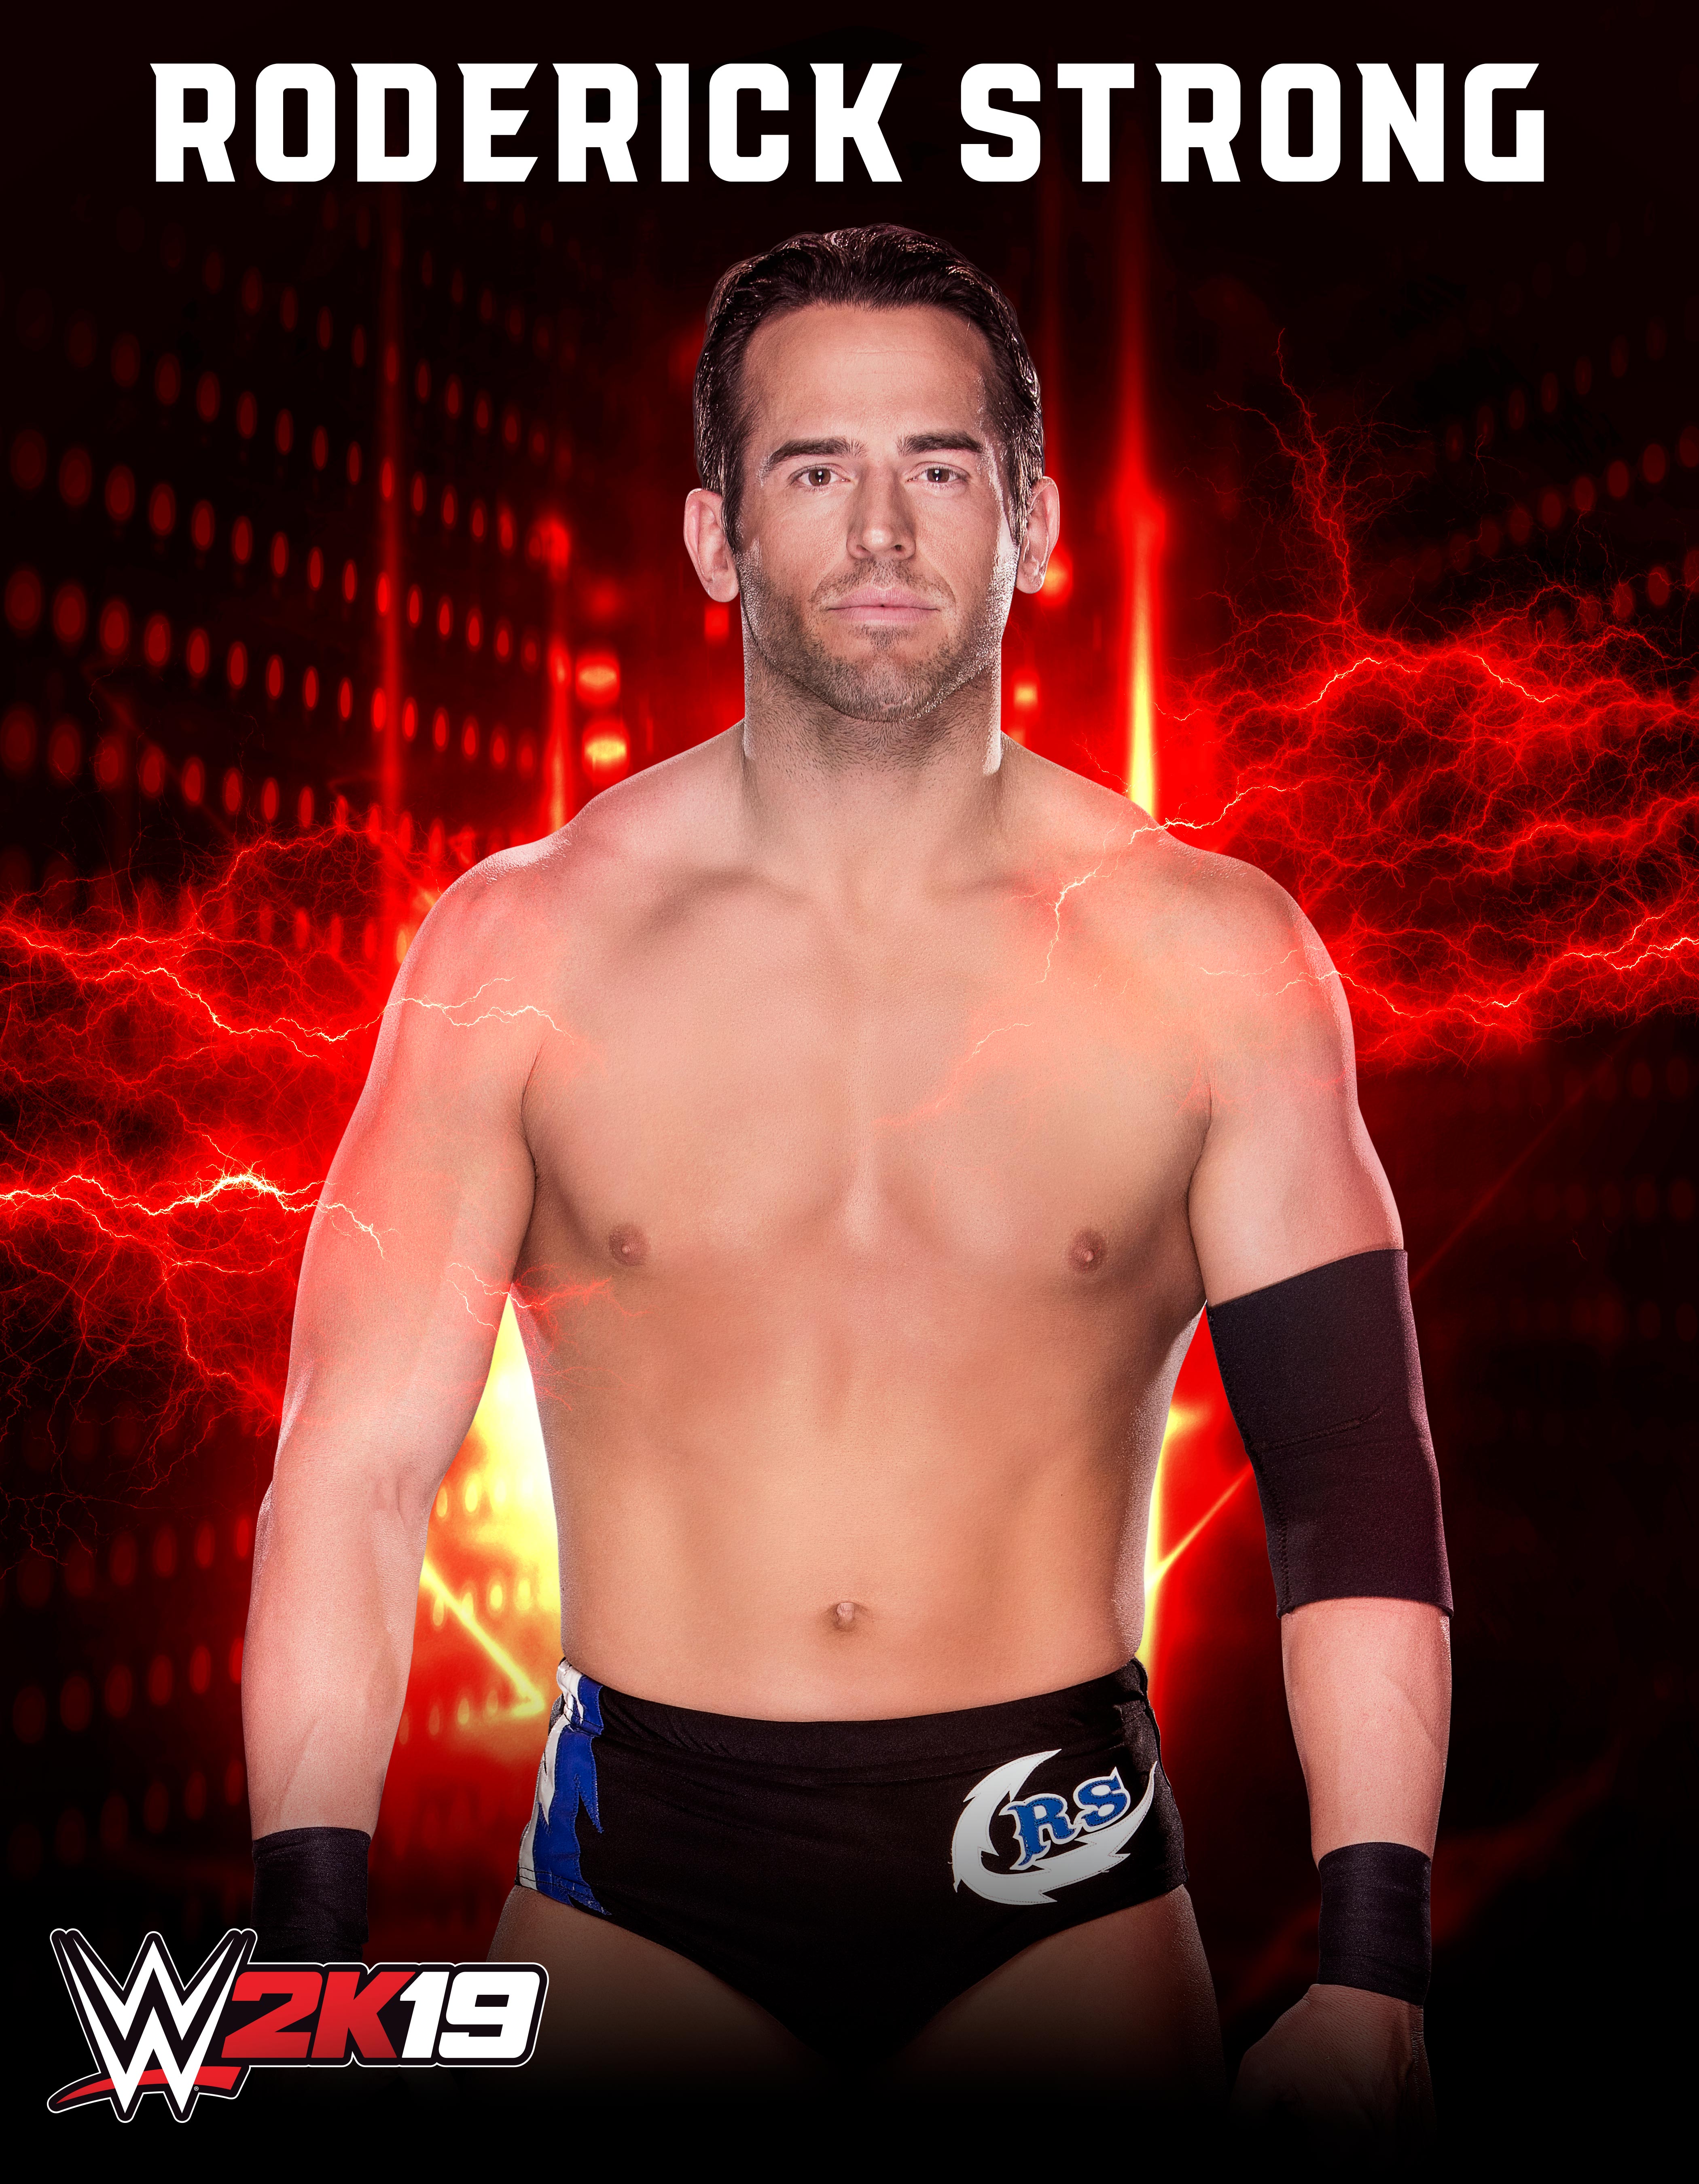 Wwe2k19 Roster Roderick Strong